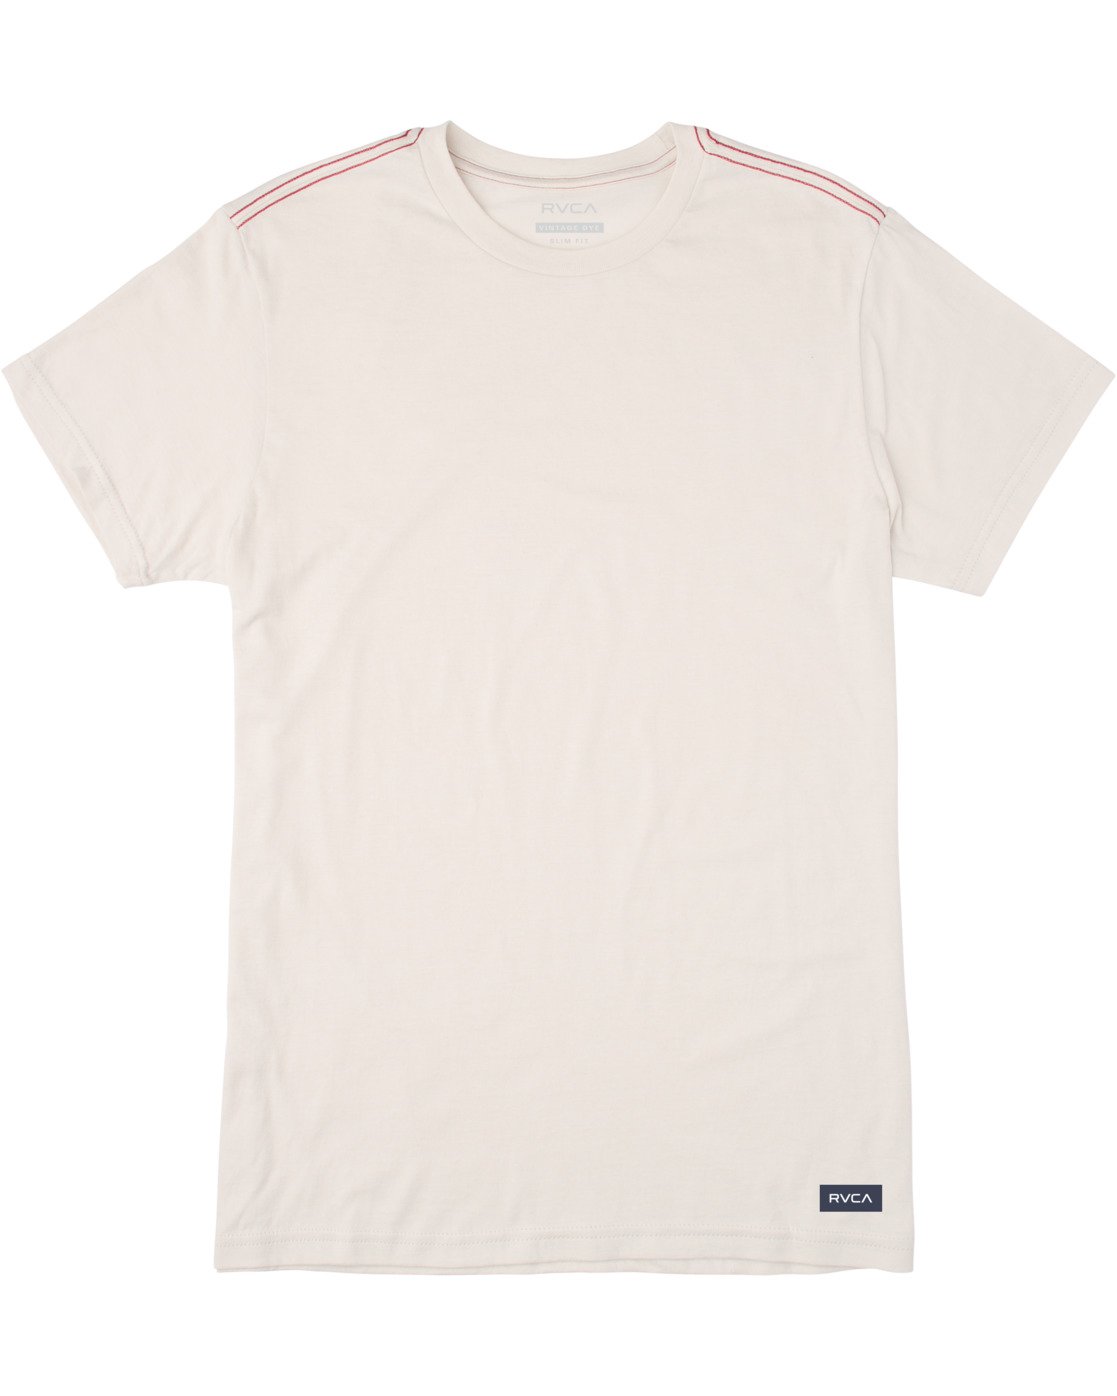 RVCA Solo Label SS Tee ANW-AntiqueWhite XL